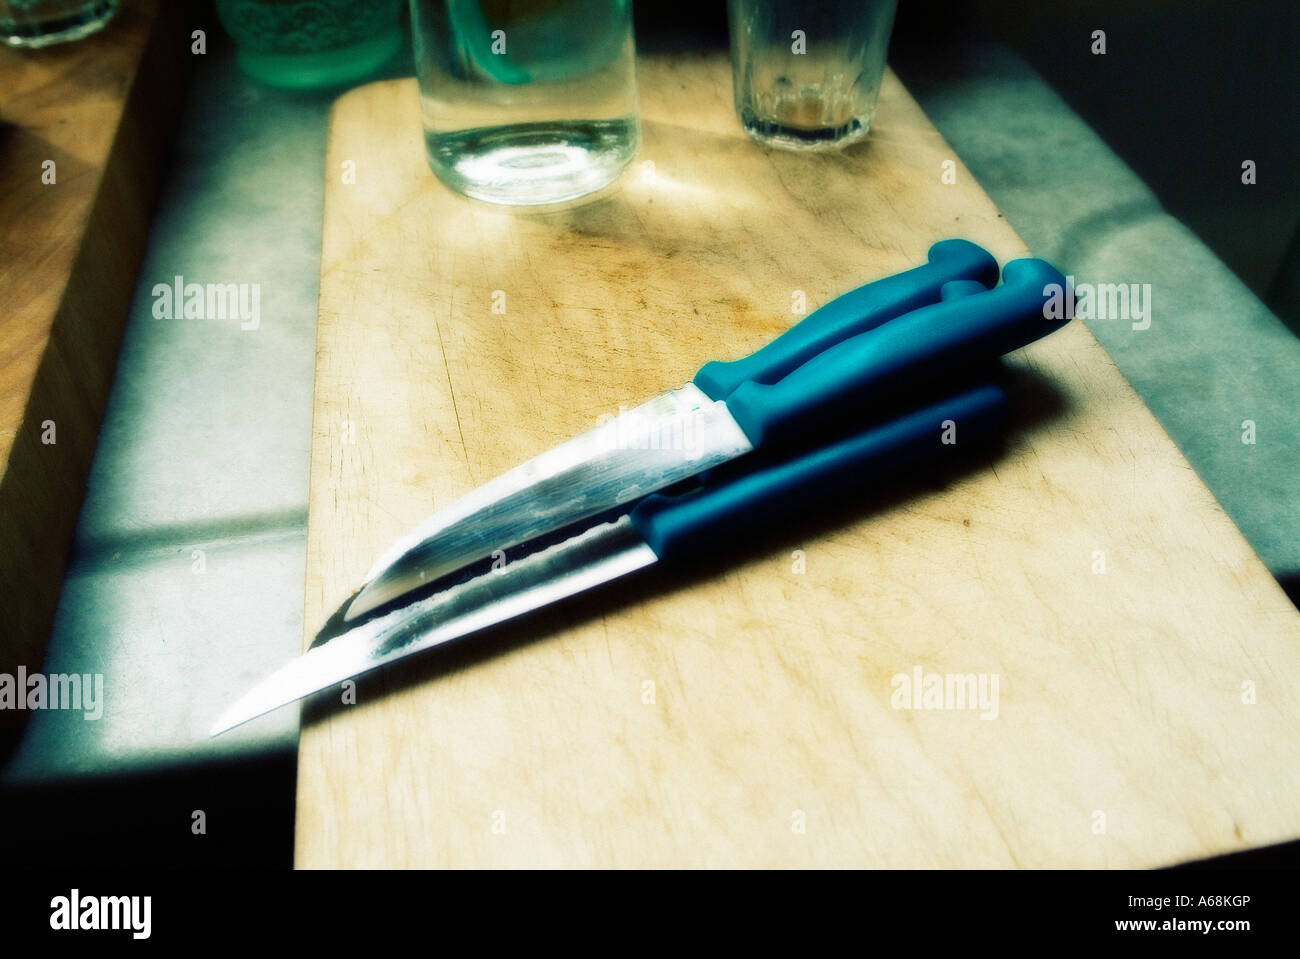 Knives on a table at kitchen Stock Photo